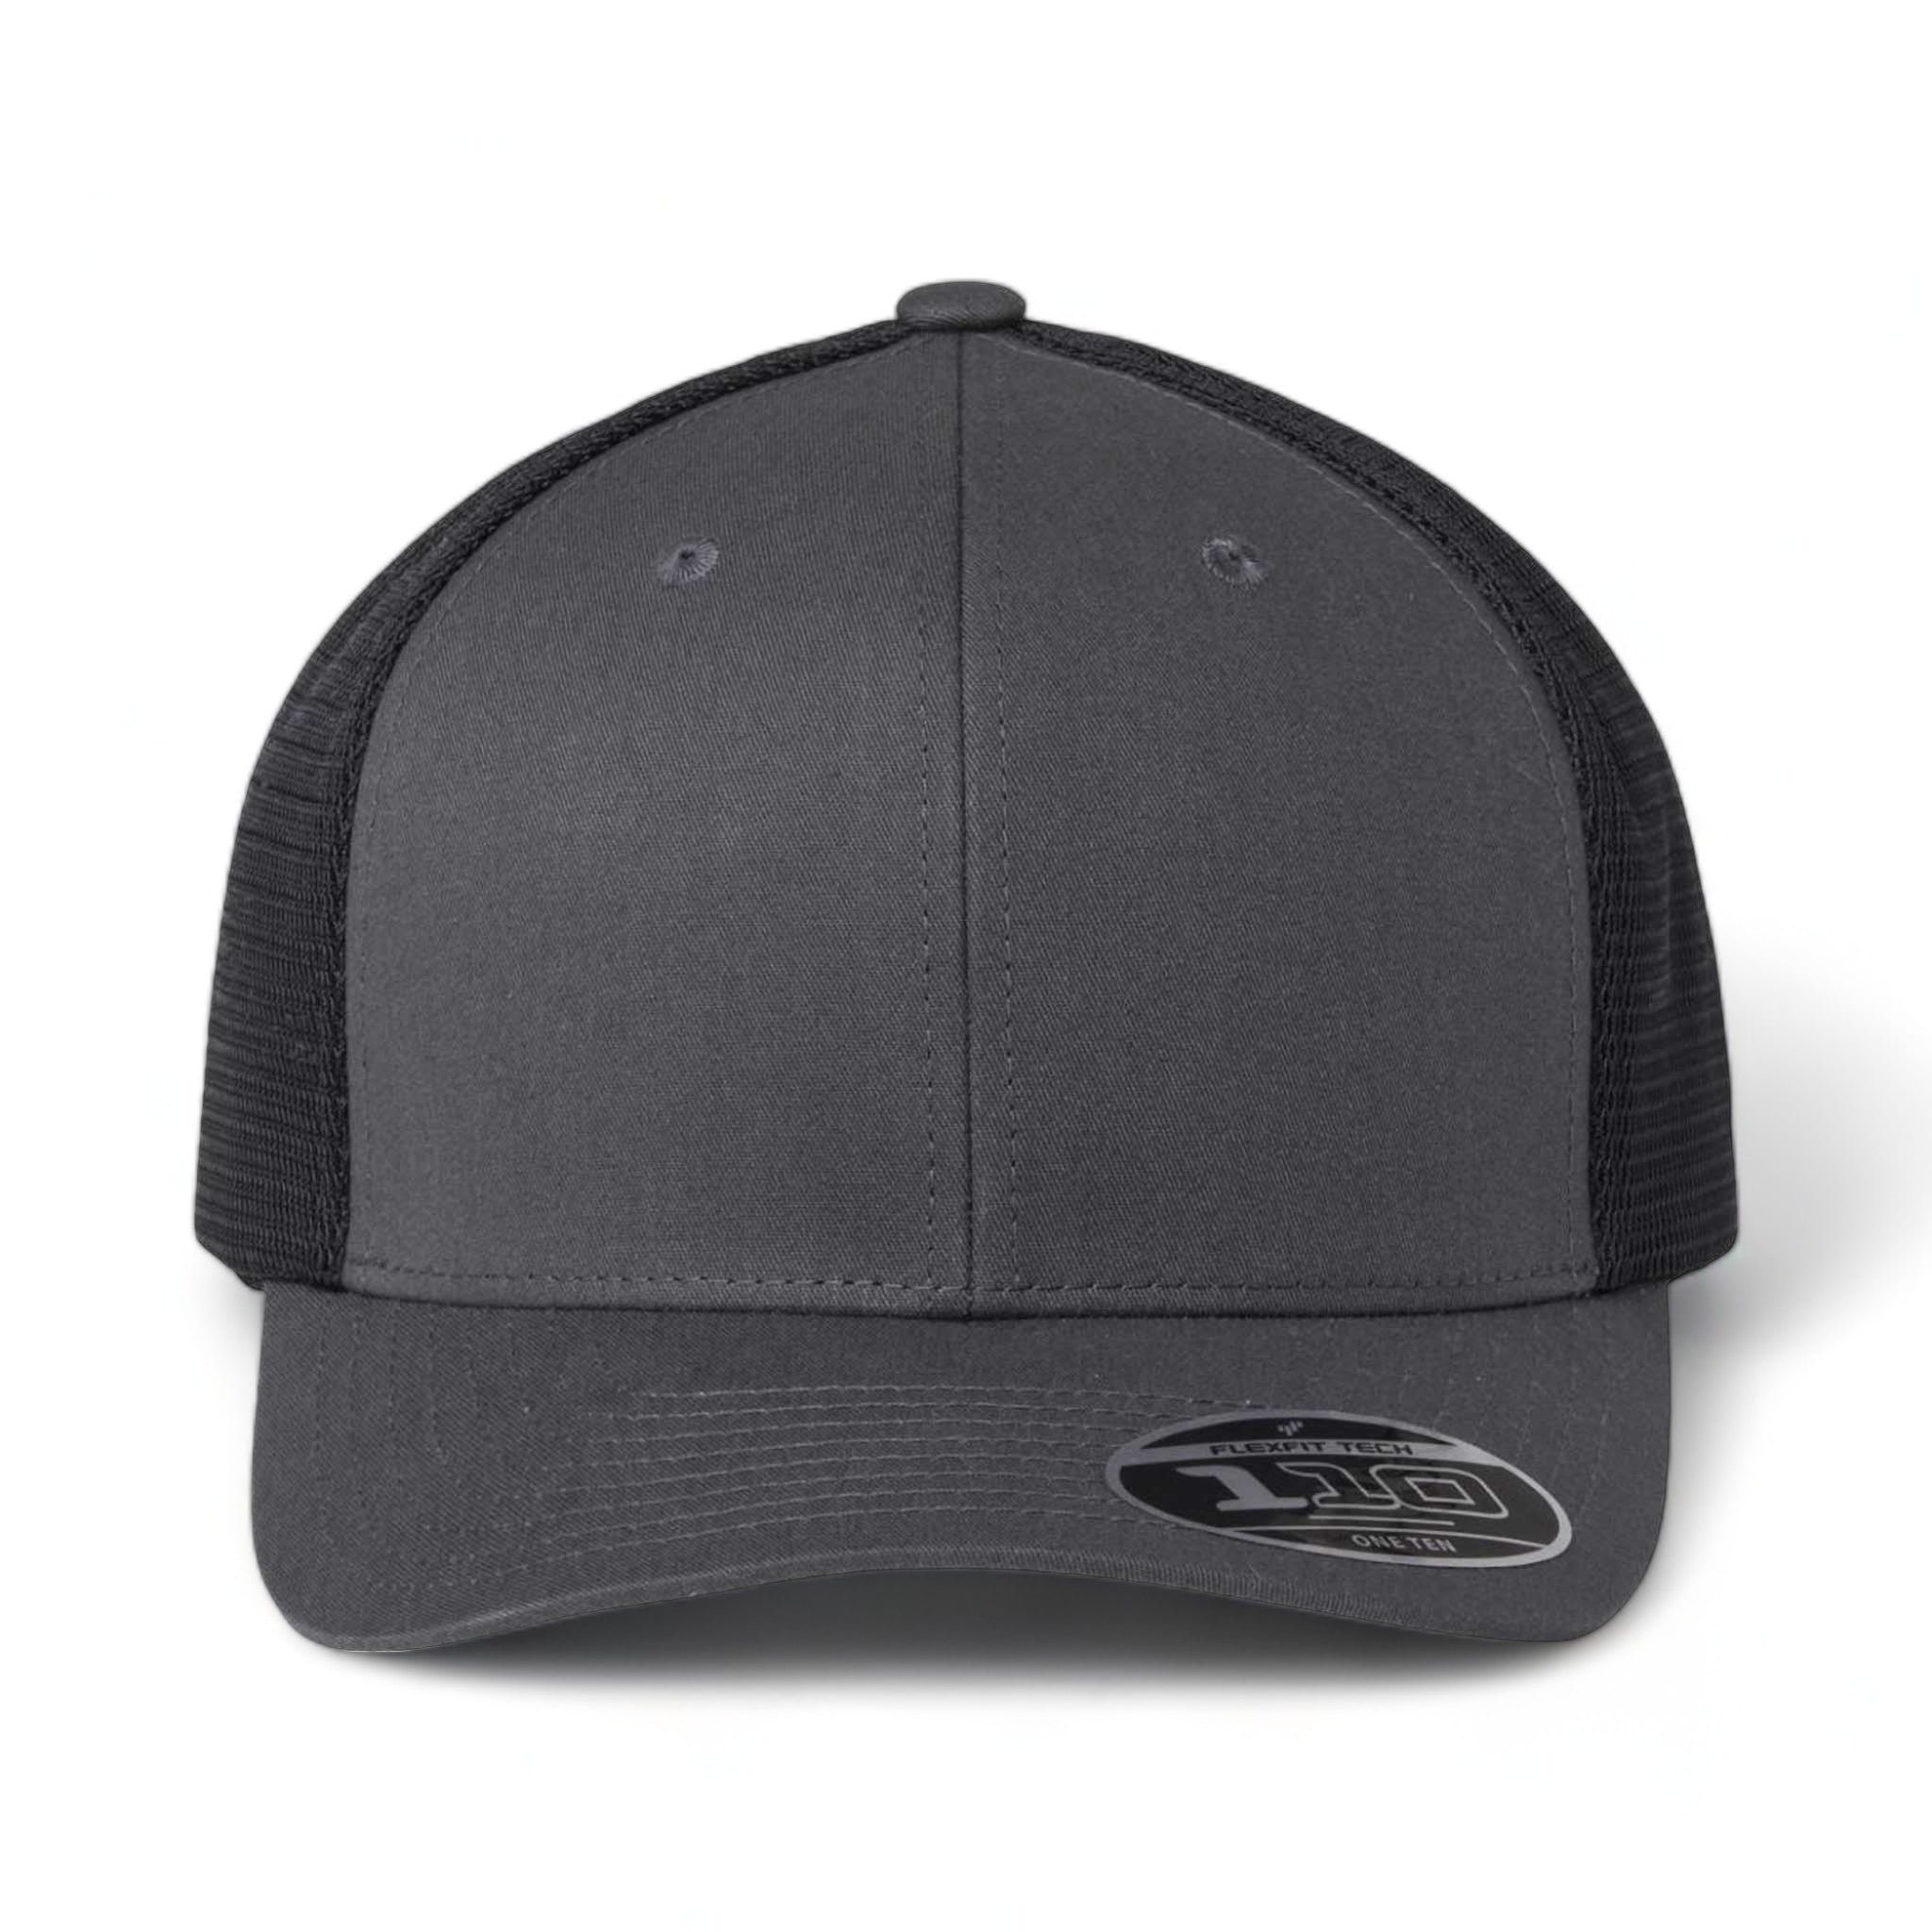 Front view of Flexfit 110M custom hat in charcoal and black